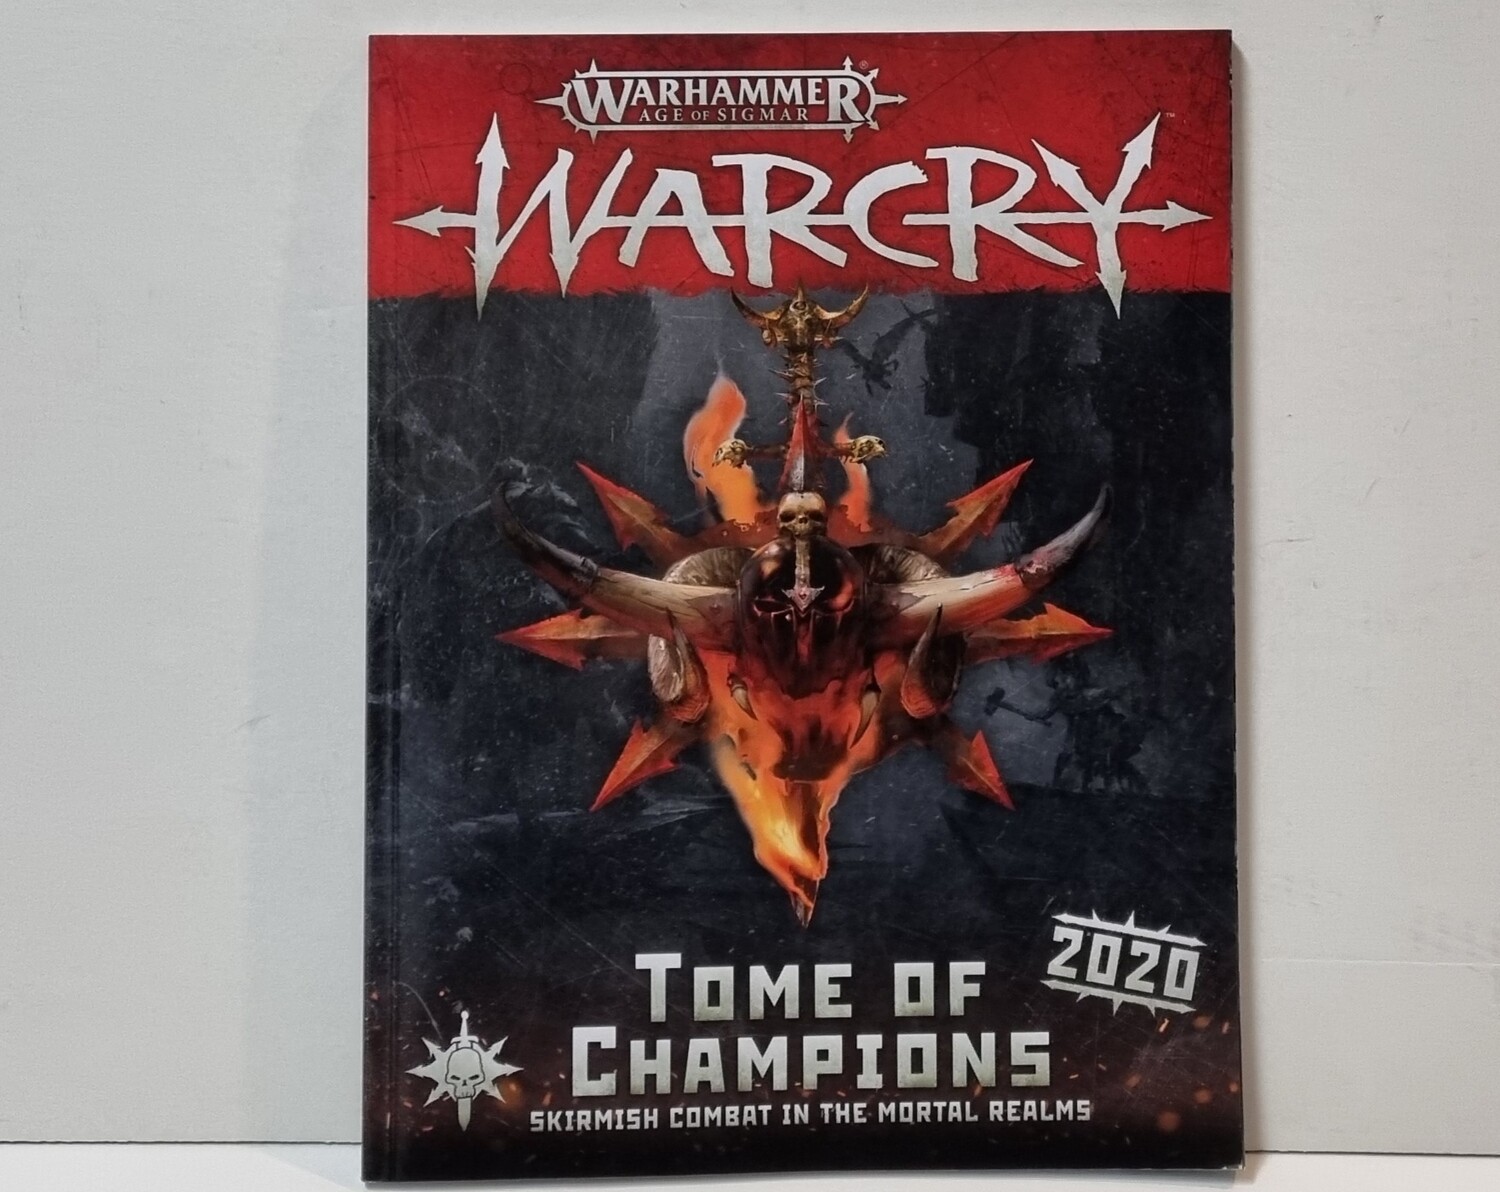 Warhammer, Age of Sigmar, Warcry: Tome of Champions 2020